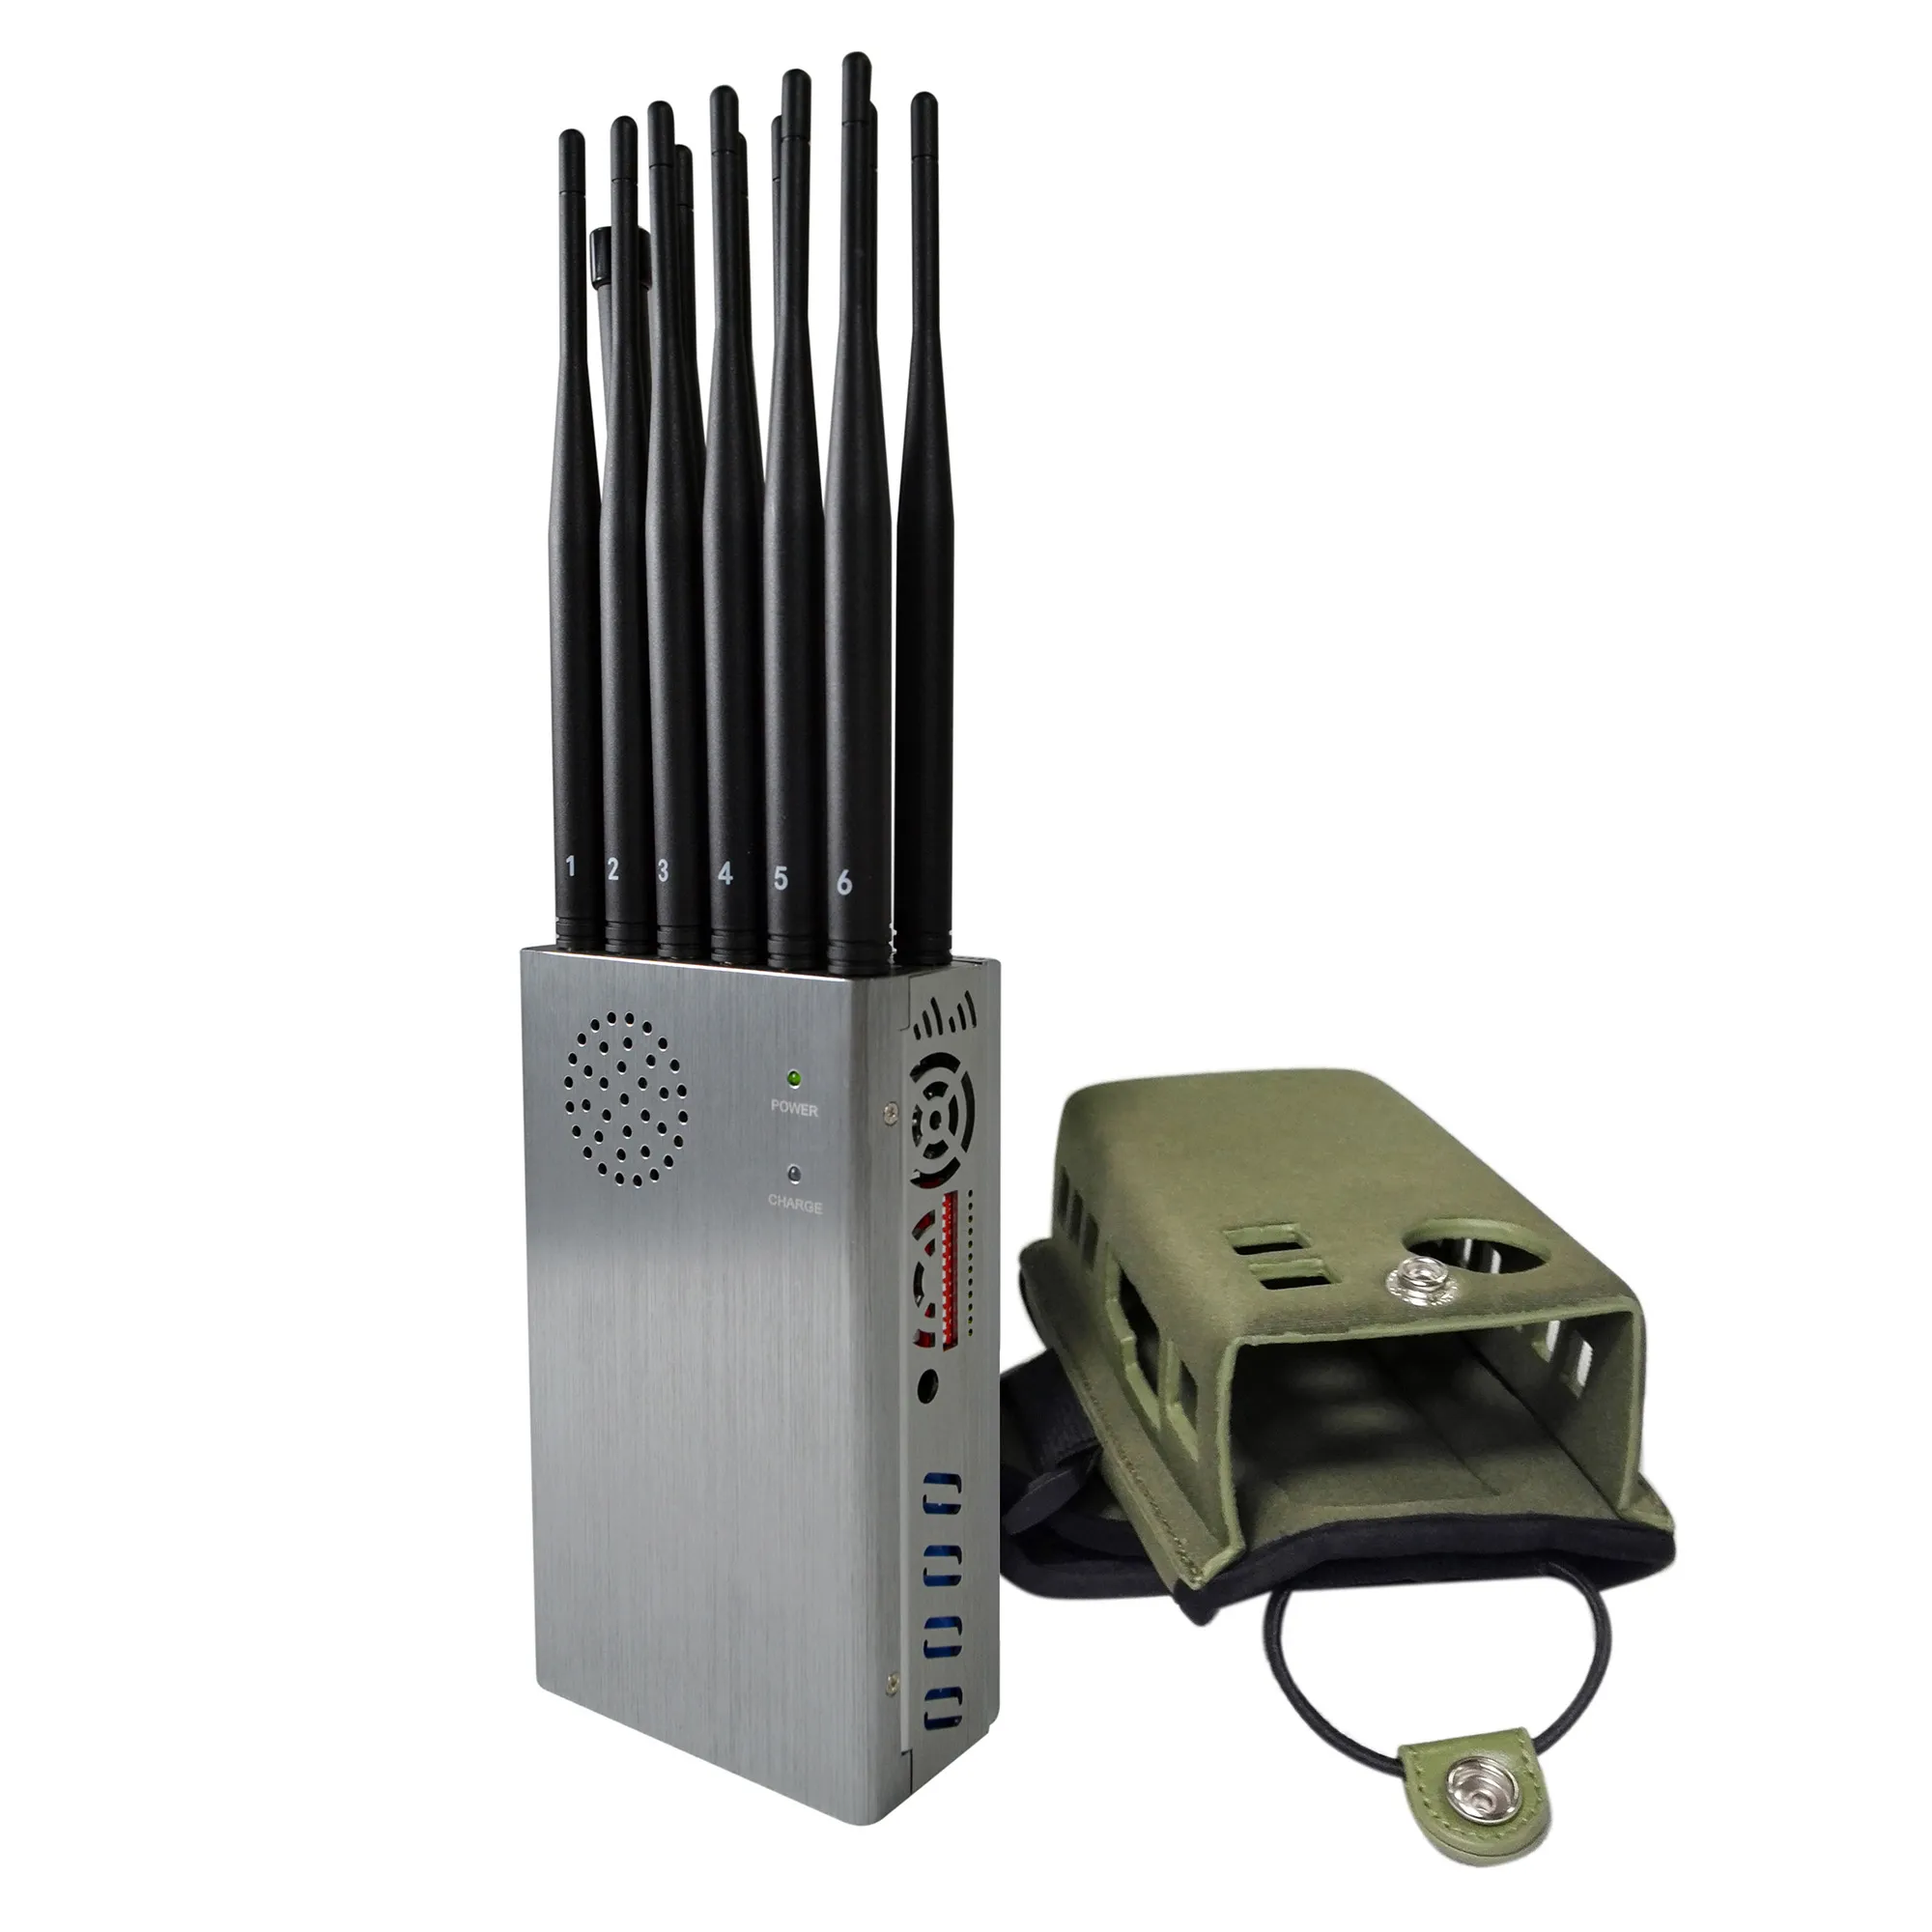 Portable signal jammer detector for car and property protection